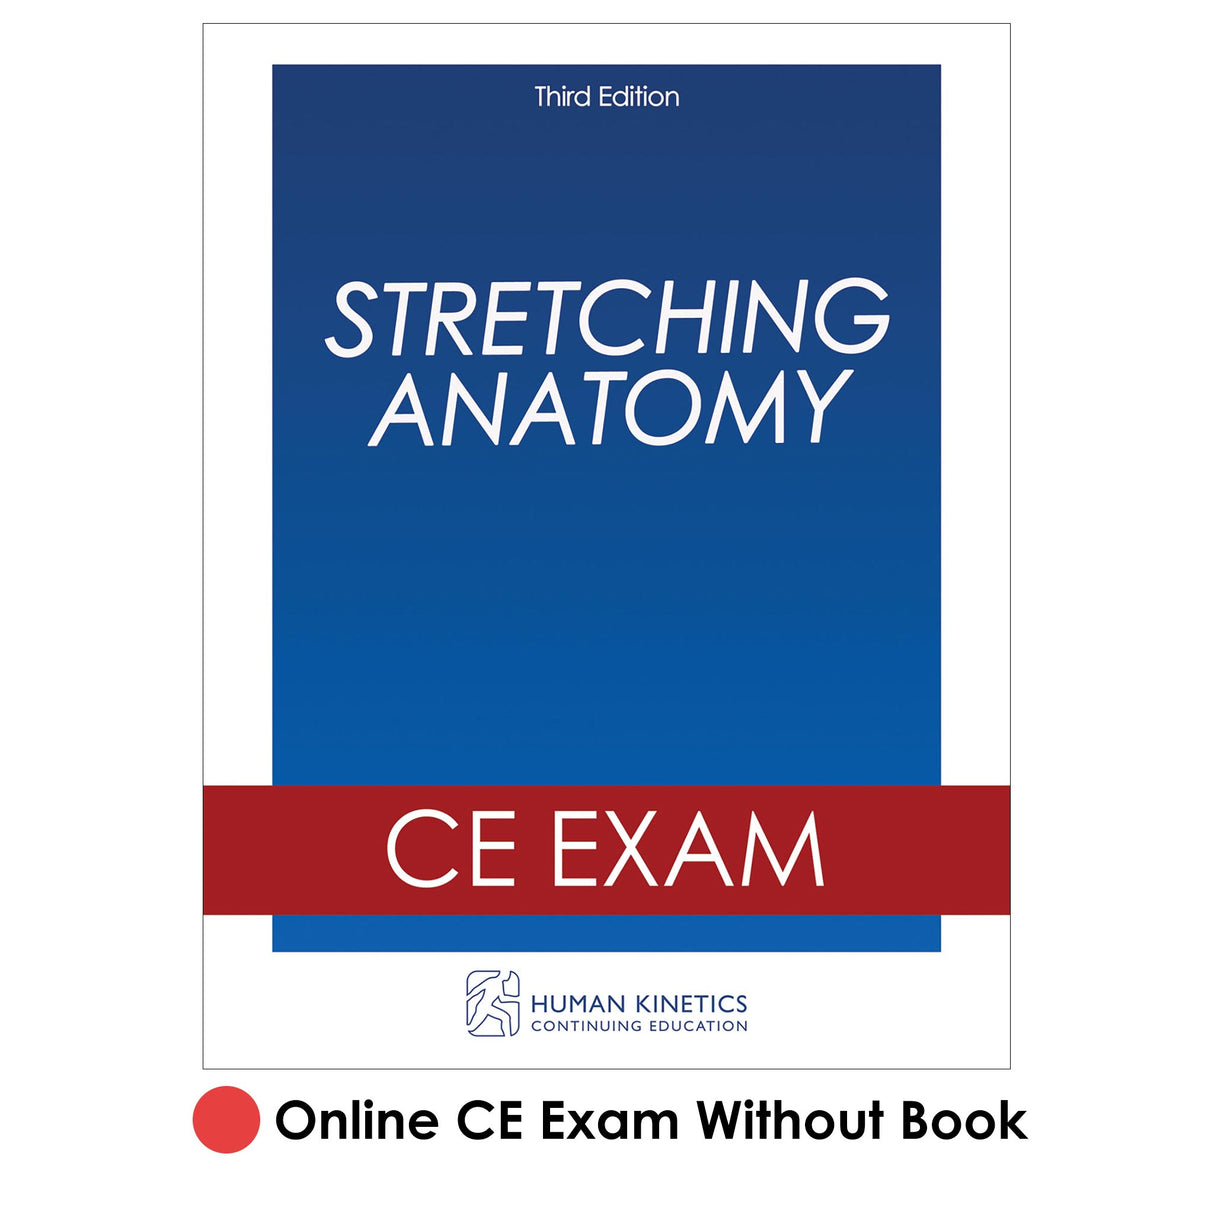 Stretching Anatomy 3rd Edition Online CE Exam Without Book